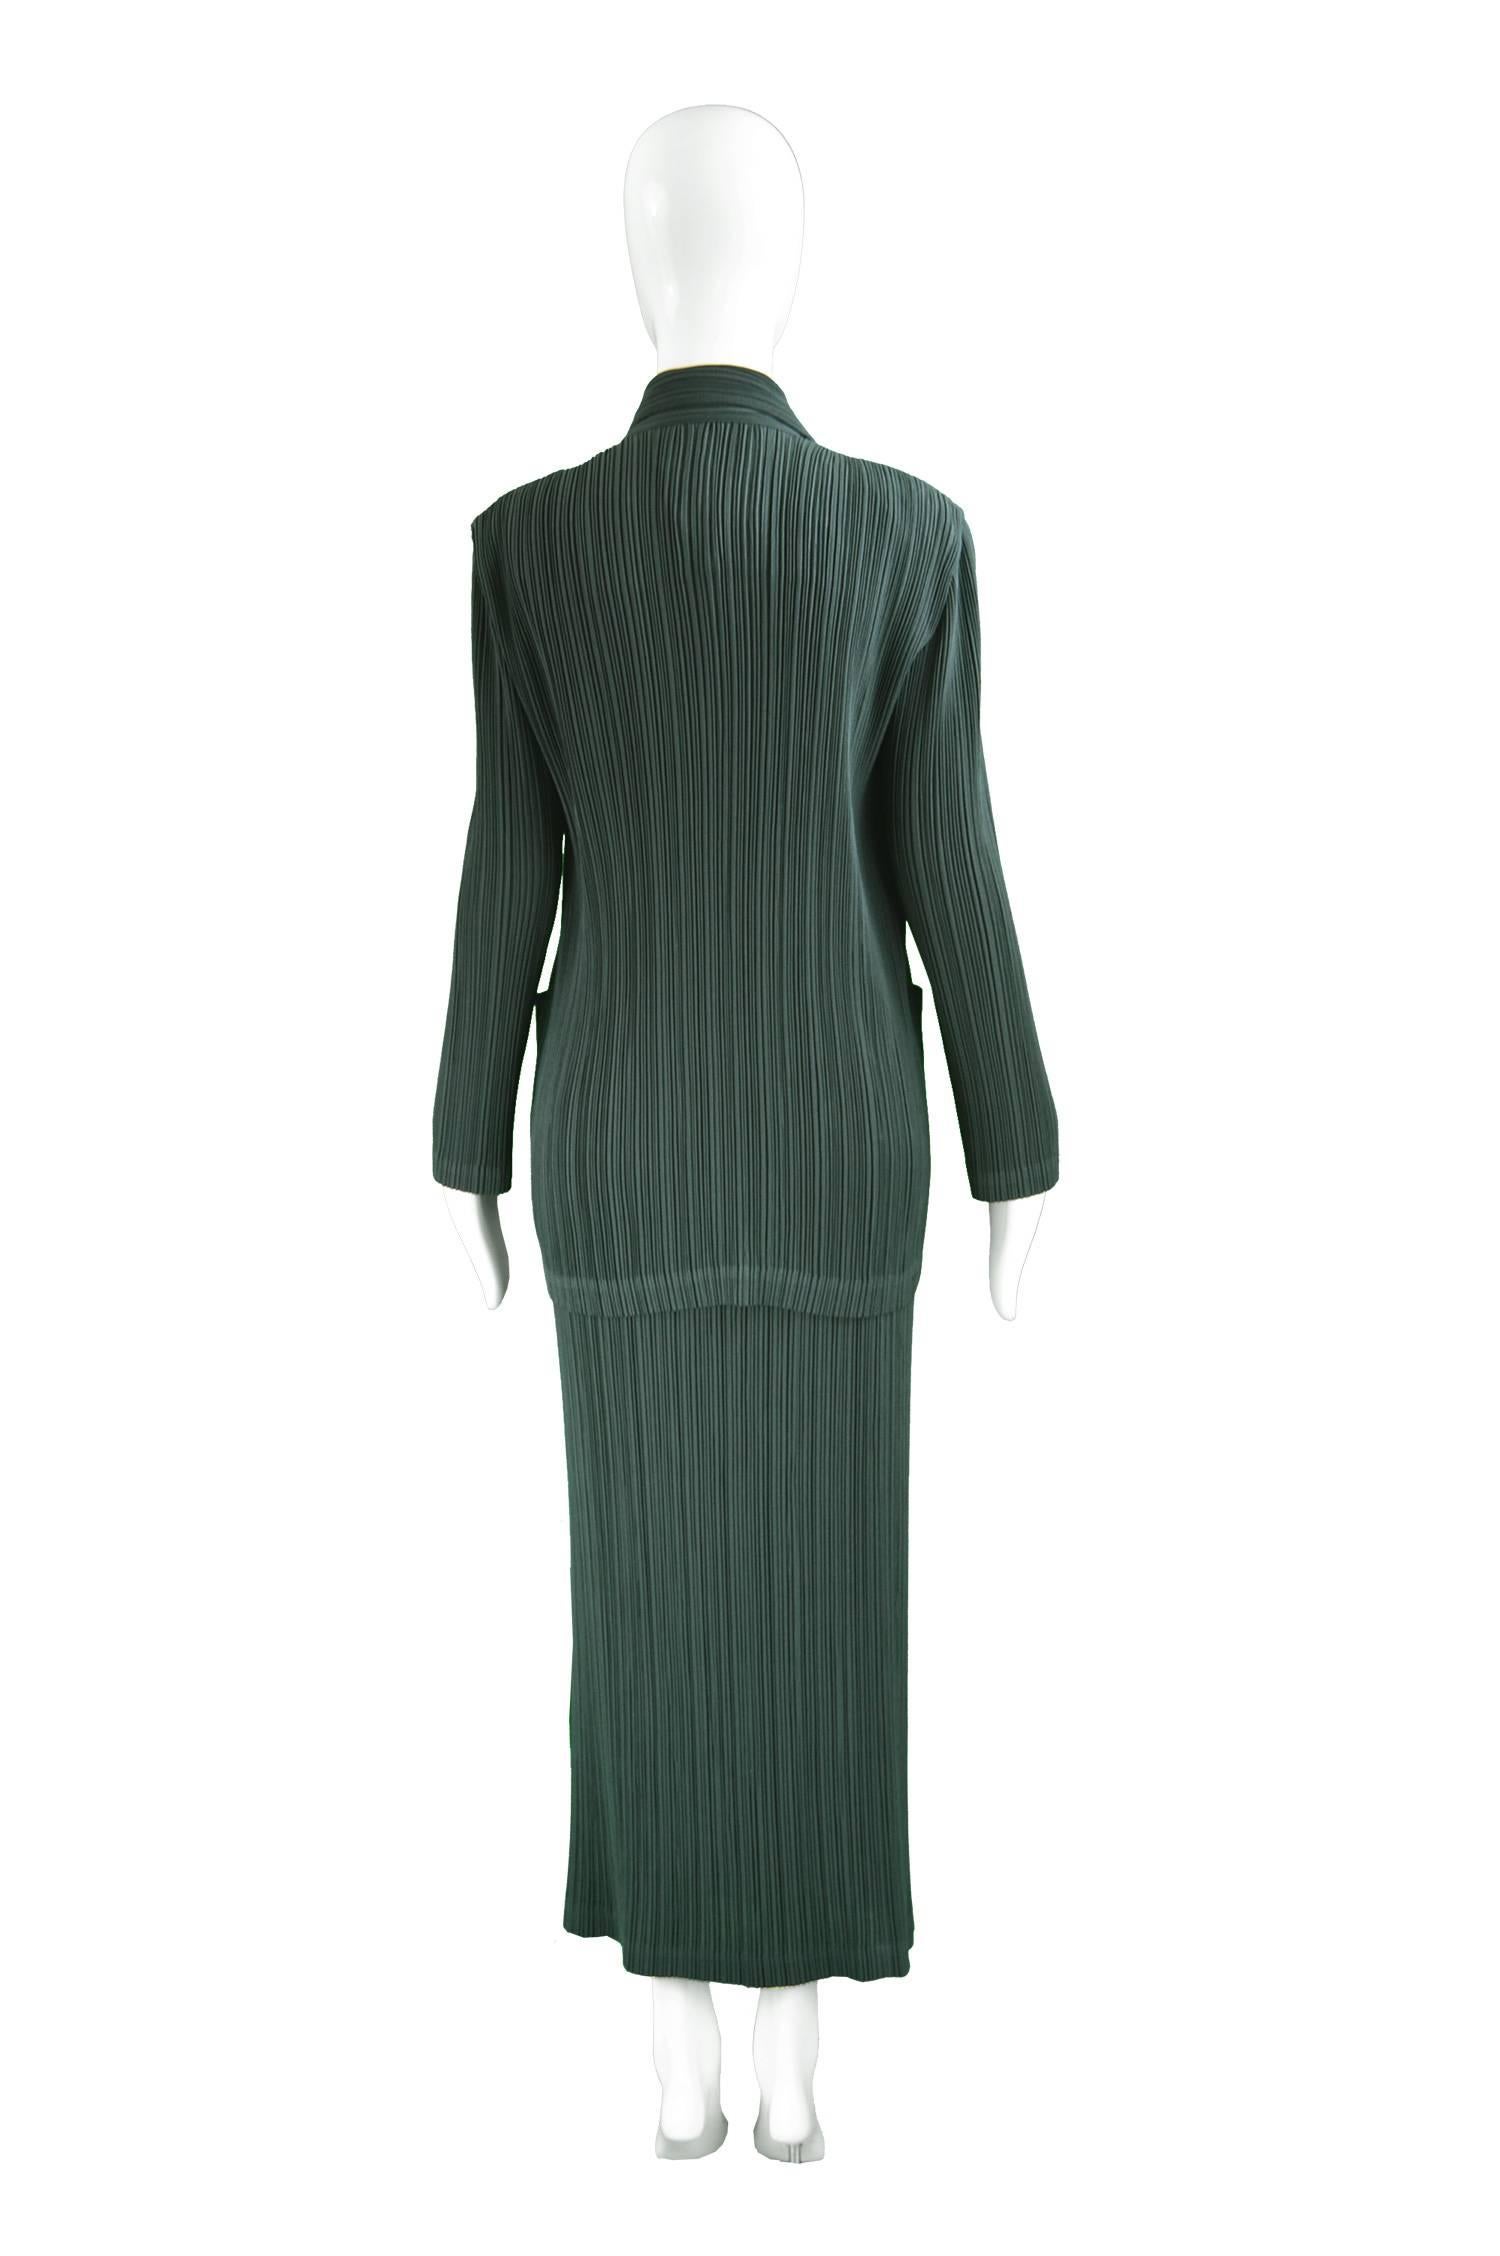 Issey Miyake Vintage Two Piece Pleated Jacket & Dress / Skirt Set, 1990s For Sale 4